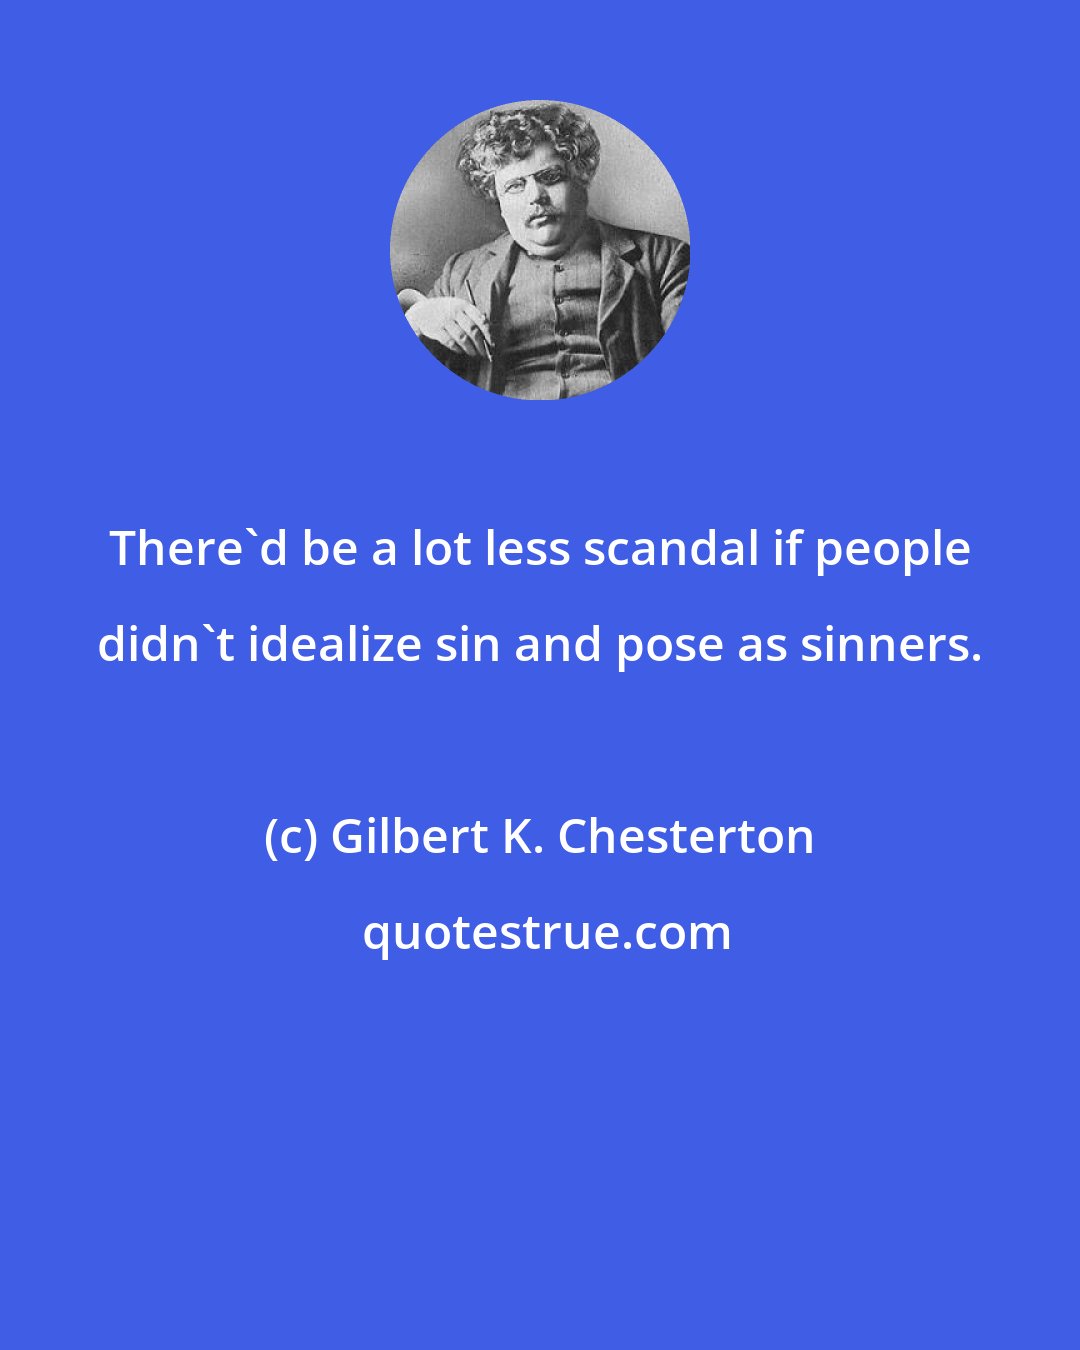 Gilbert K. Chesterton: There'd be a lot less scandal if people didn't idealize sin and pose as sinners.